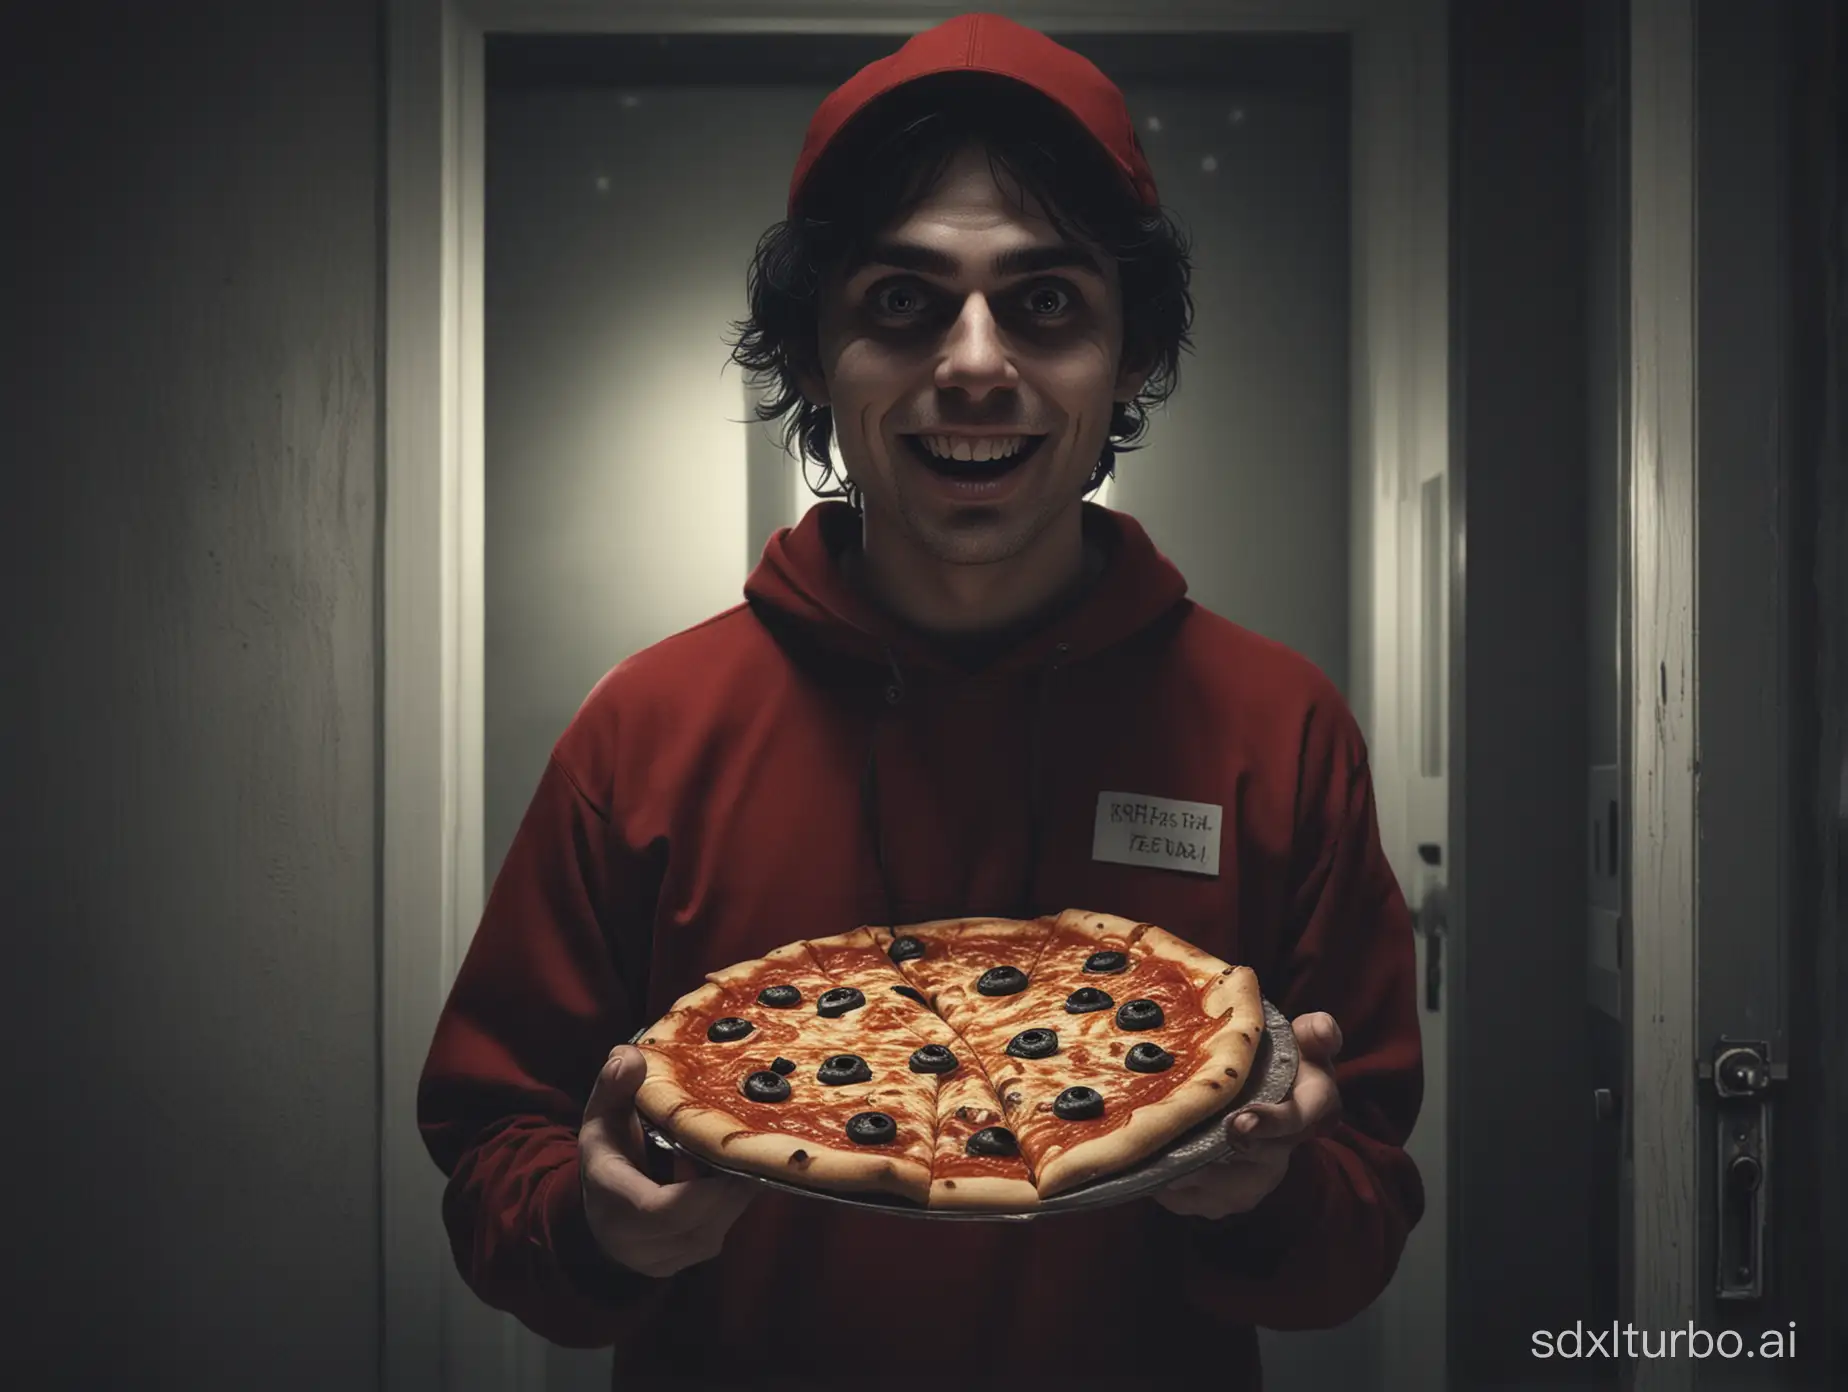 Create a high resolution, 16:9 aspect ratio, scary image about "true pizza delivery stories"? The image must be photorealistic, mysterious, full body shot outside house, violent man standing in the dark, house door, evil eyes, malicious man, malevolent expression, evil food delivery guy, scary courier, evil smile, evil grin, psychopath smiling, night lights, no blood, no tears, sinister but realistic people, creepy, scary atmosphere, catchy, must pop and catch attention.